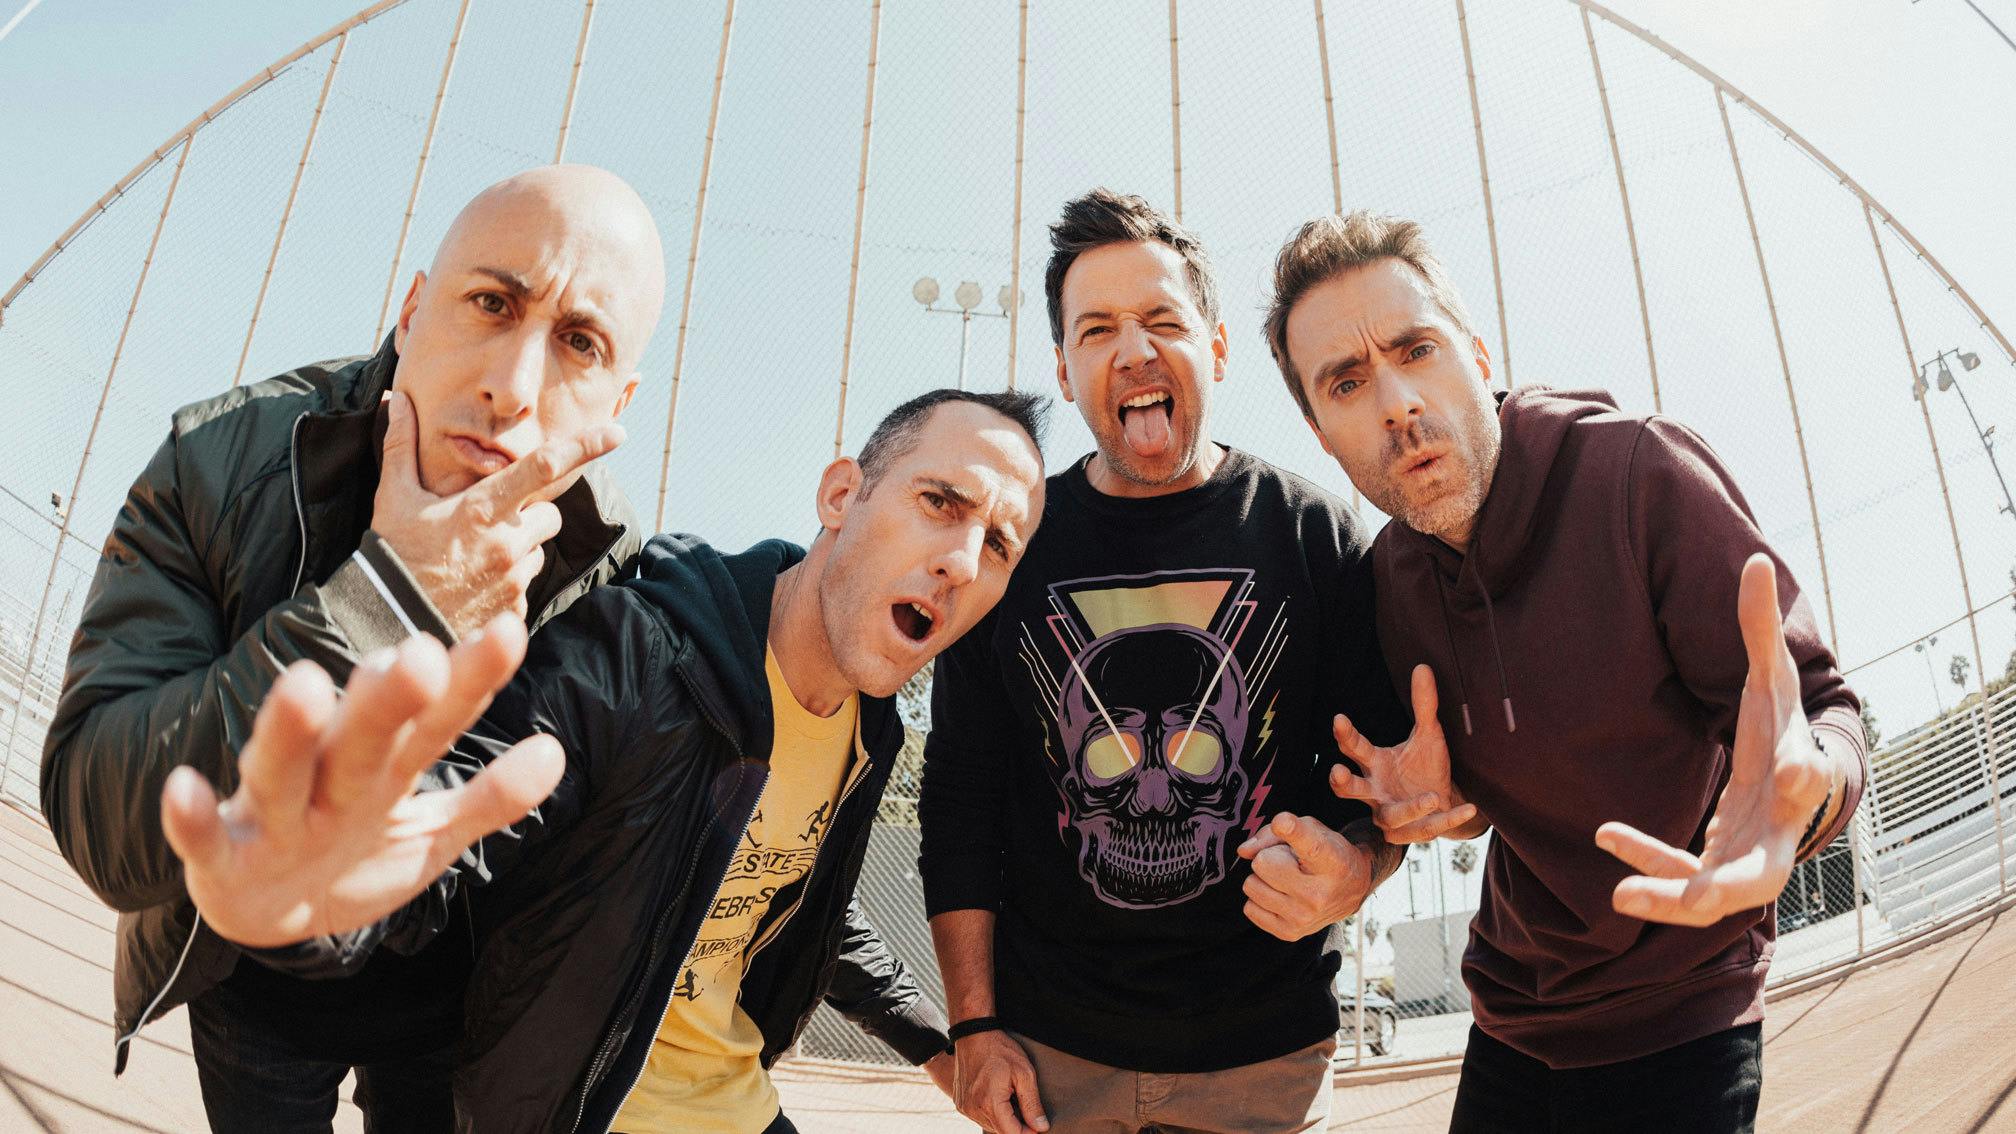 “We haven’t felt like this since 2004”: Simple Plan talk longevity, fundraising for Ukraine and “powerful” new record Harder Than It Looks